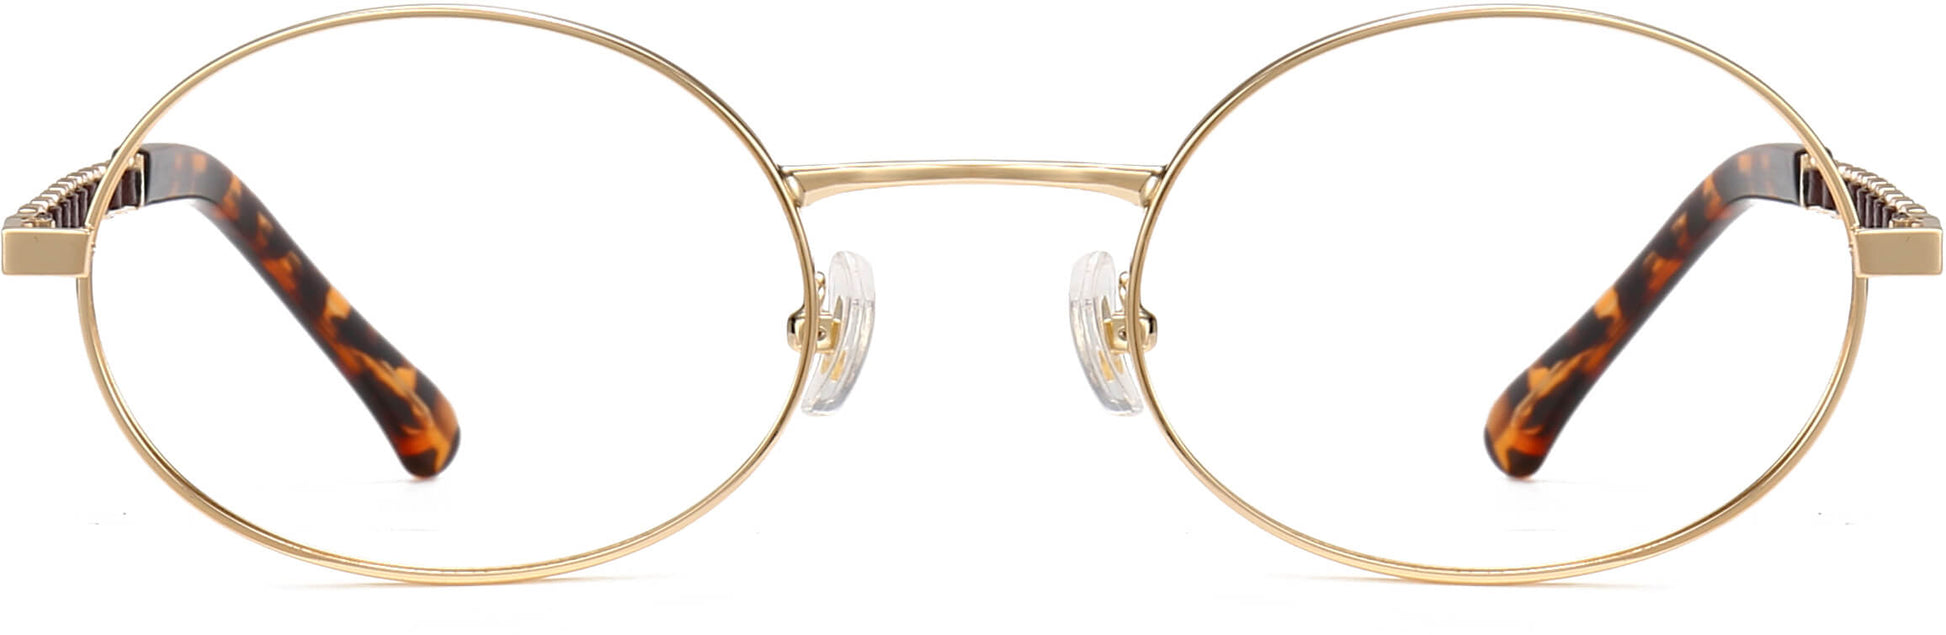 Lillie Round Gold Eyeglasses from ANRRI, front view